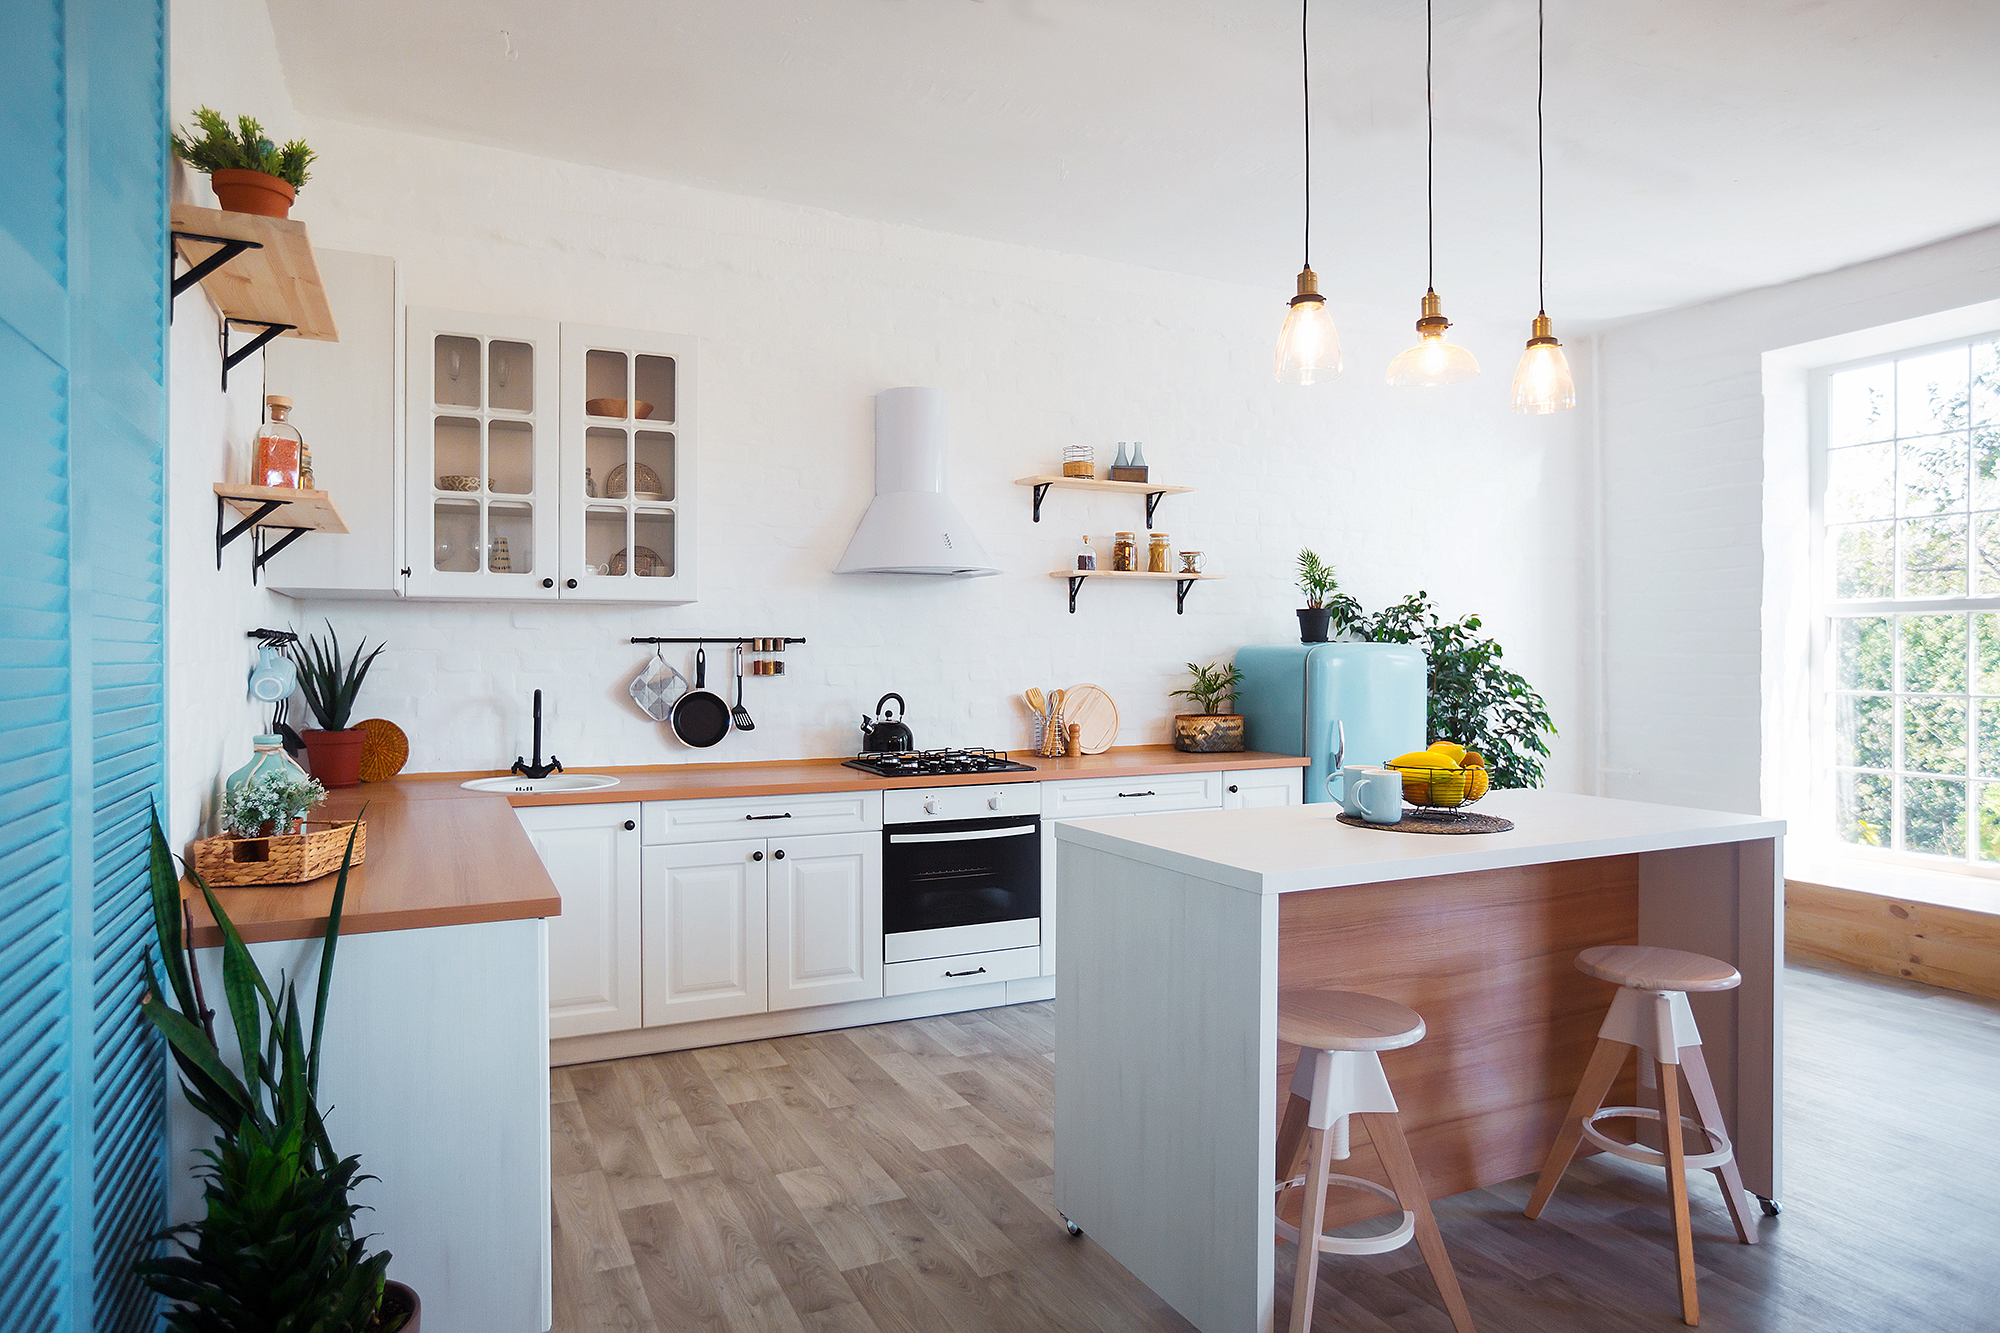 5 Ways to Revamp Your Kitchen and Increase Your Home’s Resell Value